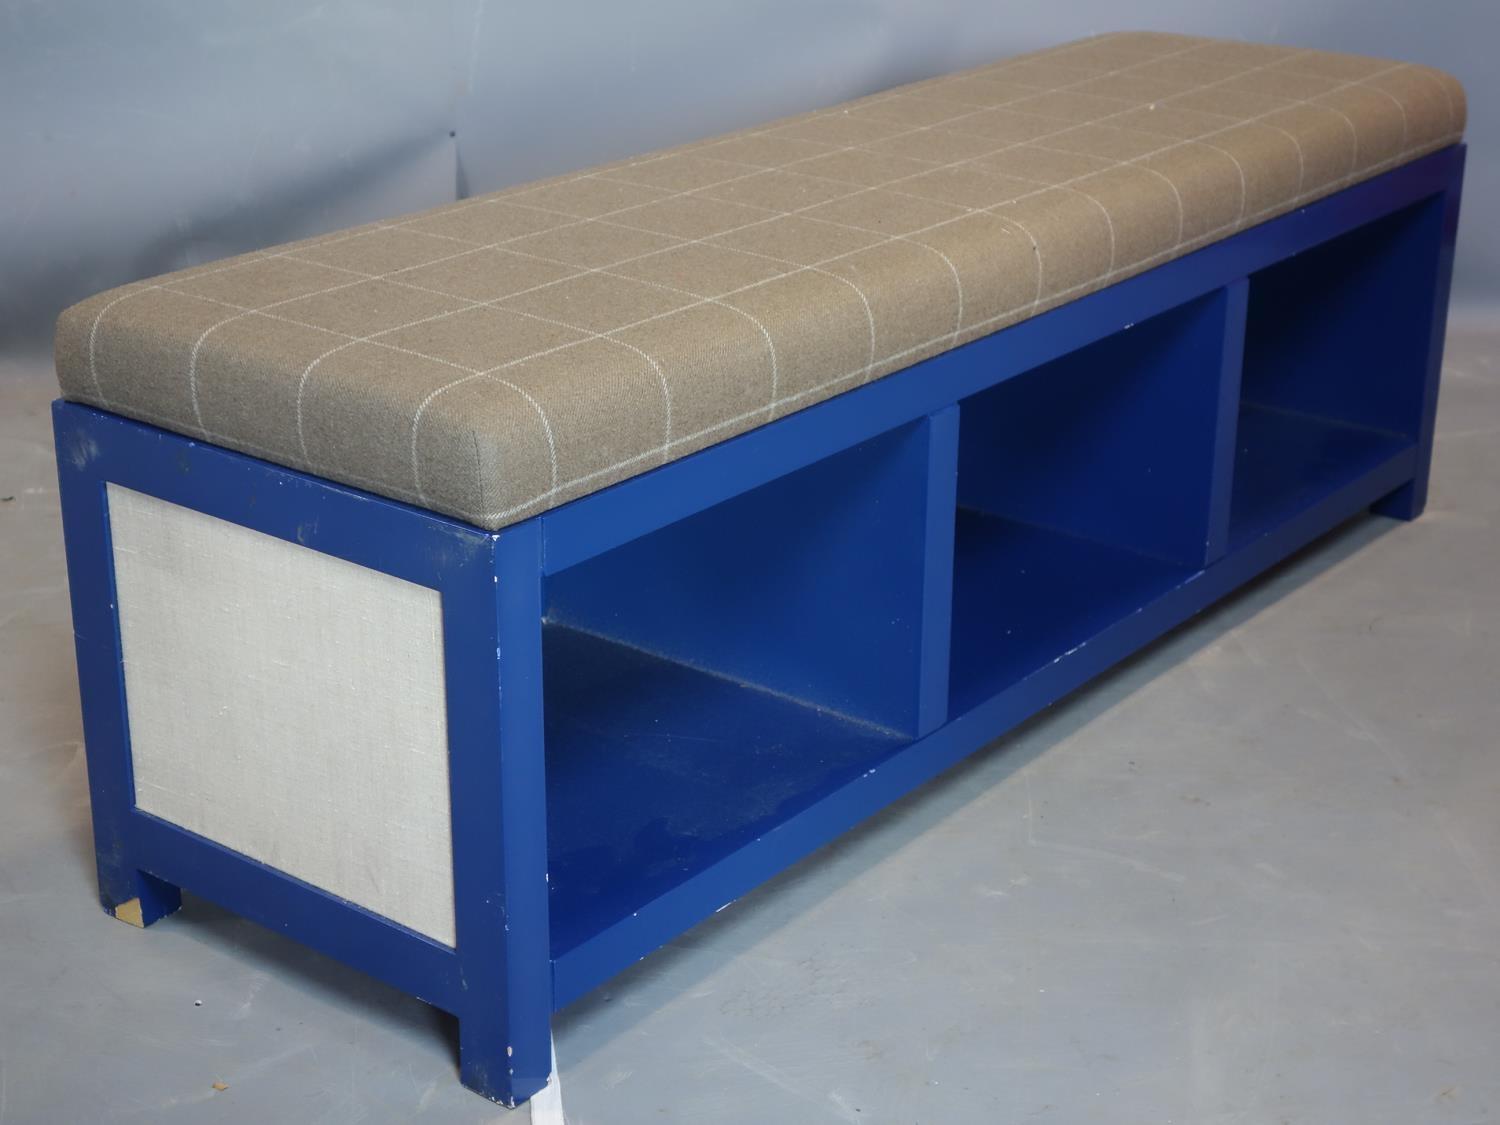 A Bernhardt Interiors ottoman bench with grey checked upholstered seat above blue painted base on - Image 2 of 2